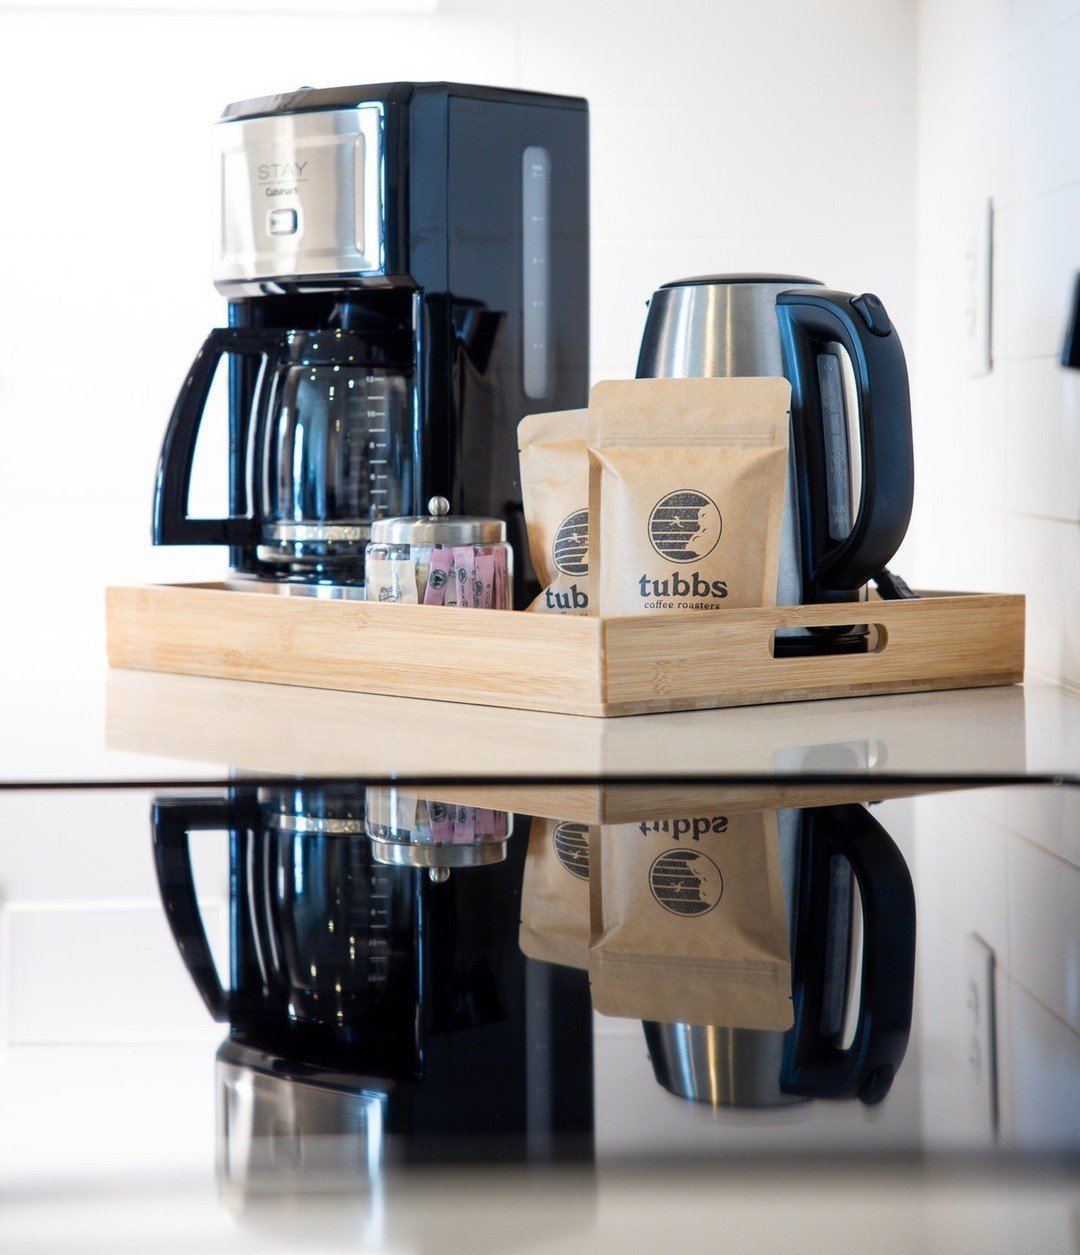 Start your morning off on the right side of the bed with our small batch, locally roasted coffee from @tubbscoffee.